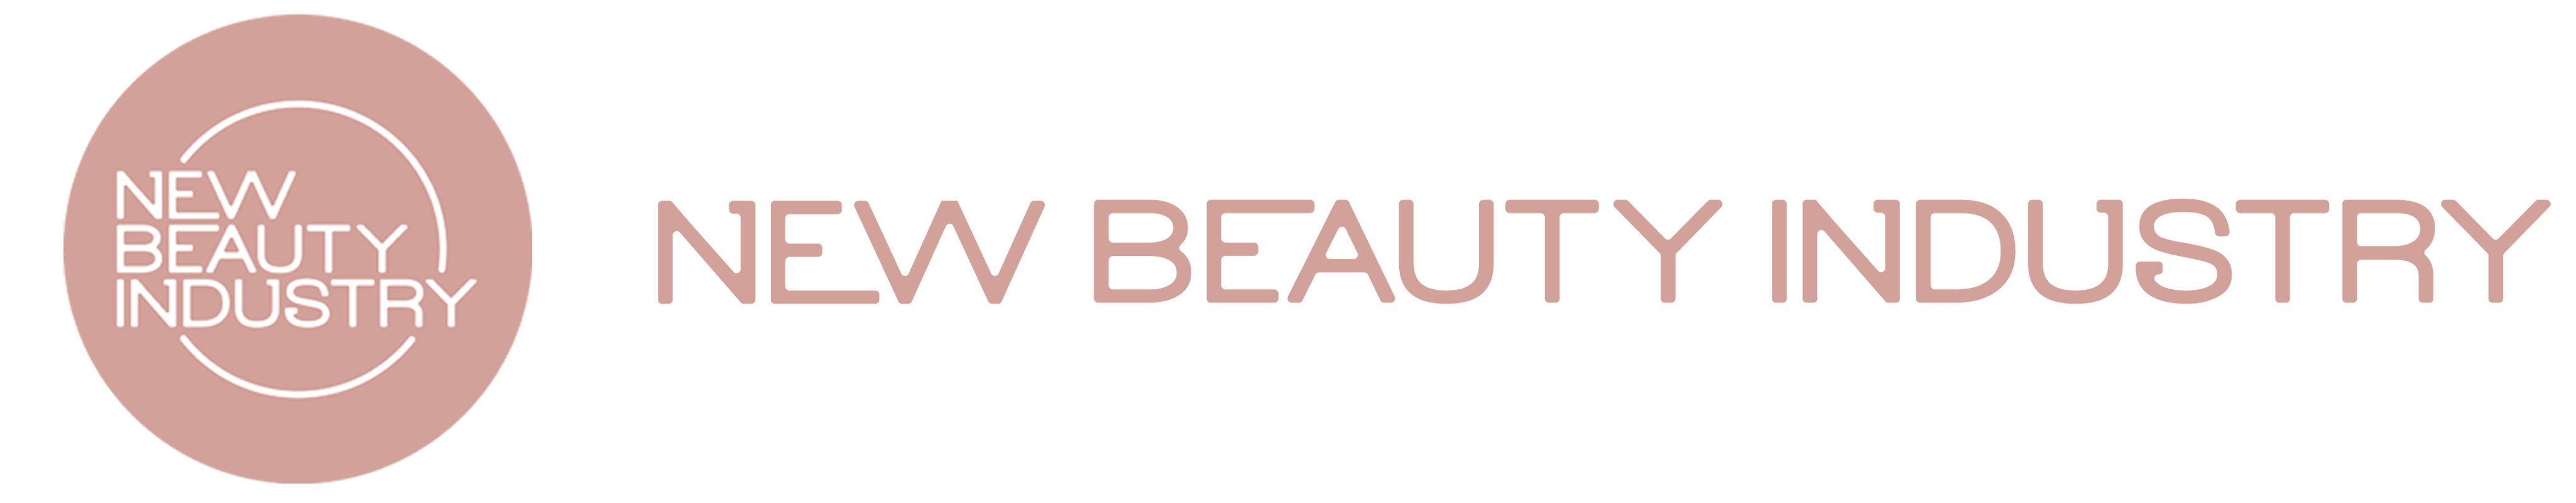 New Beauty Industry Skincare Manufacture